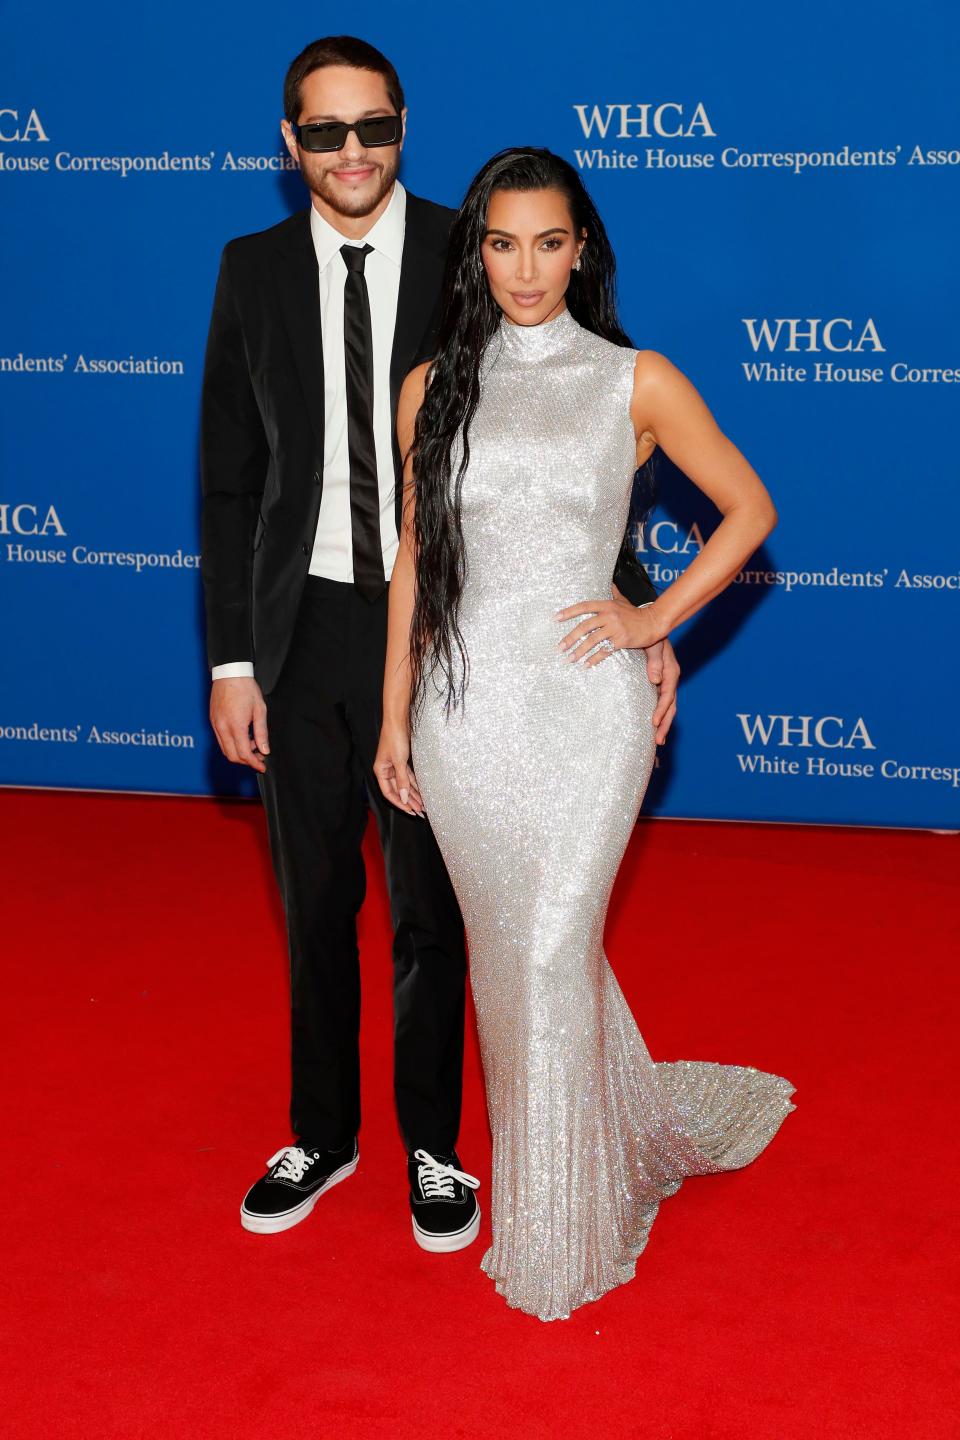 The star attended the event in Washington DC with boyfriend Pete Davidson. (Getty Images)